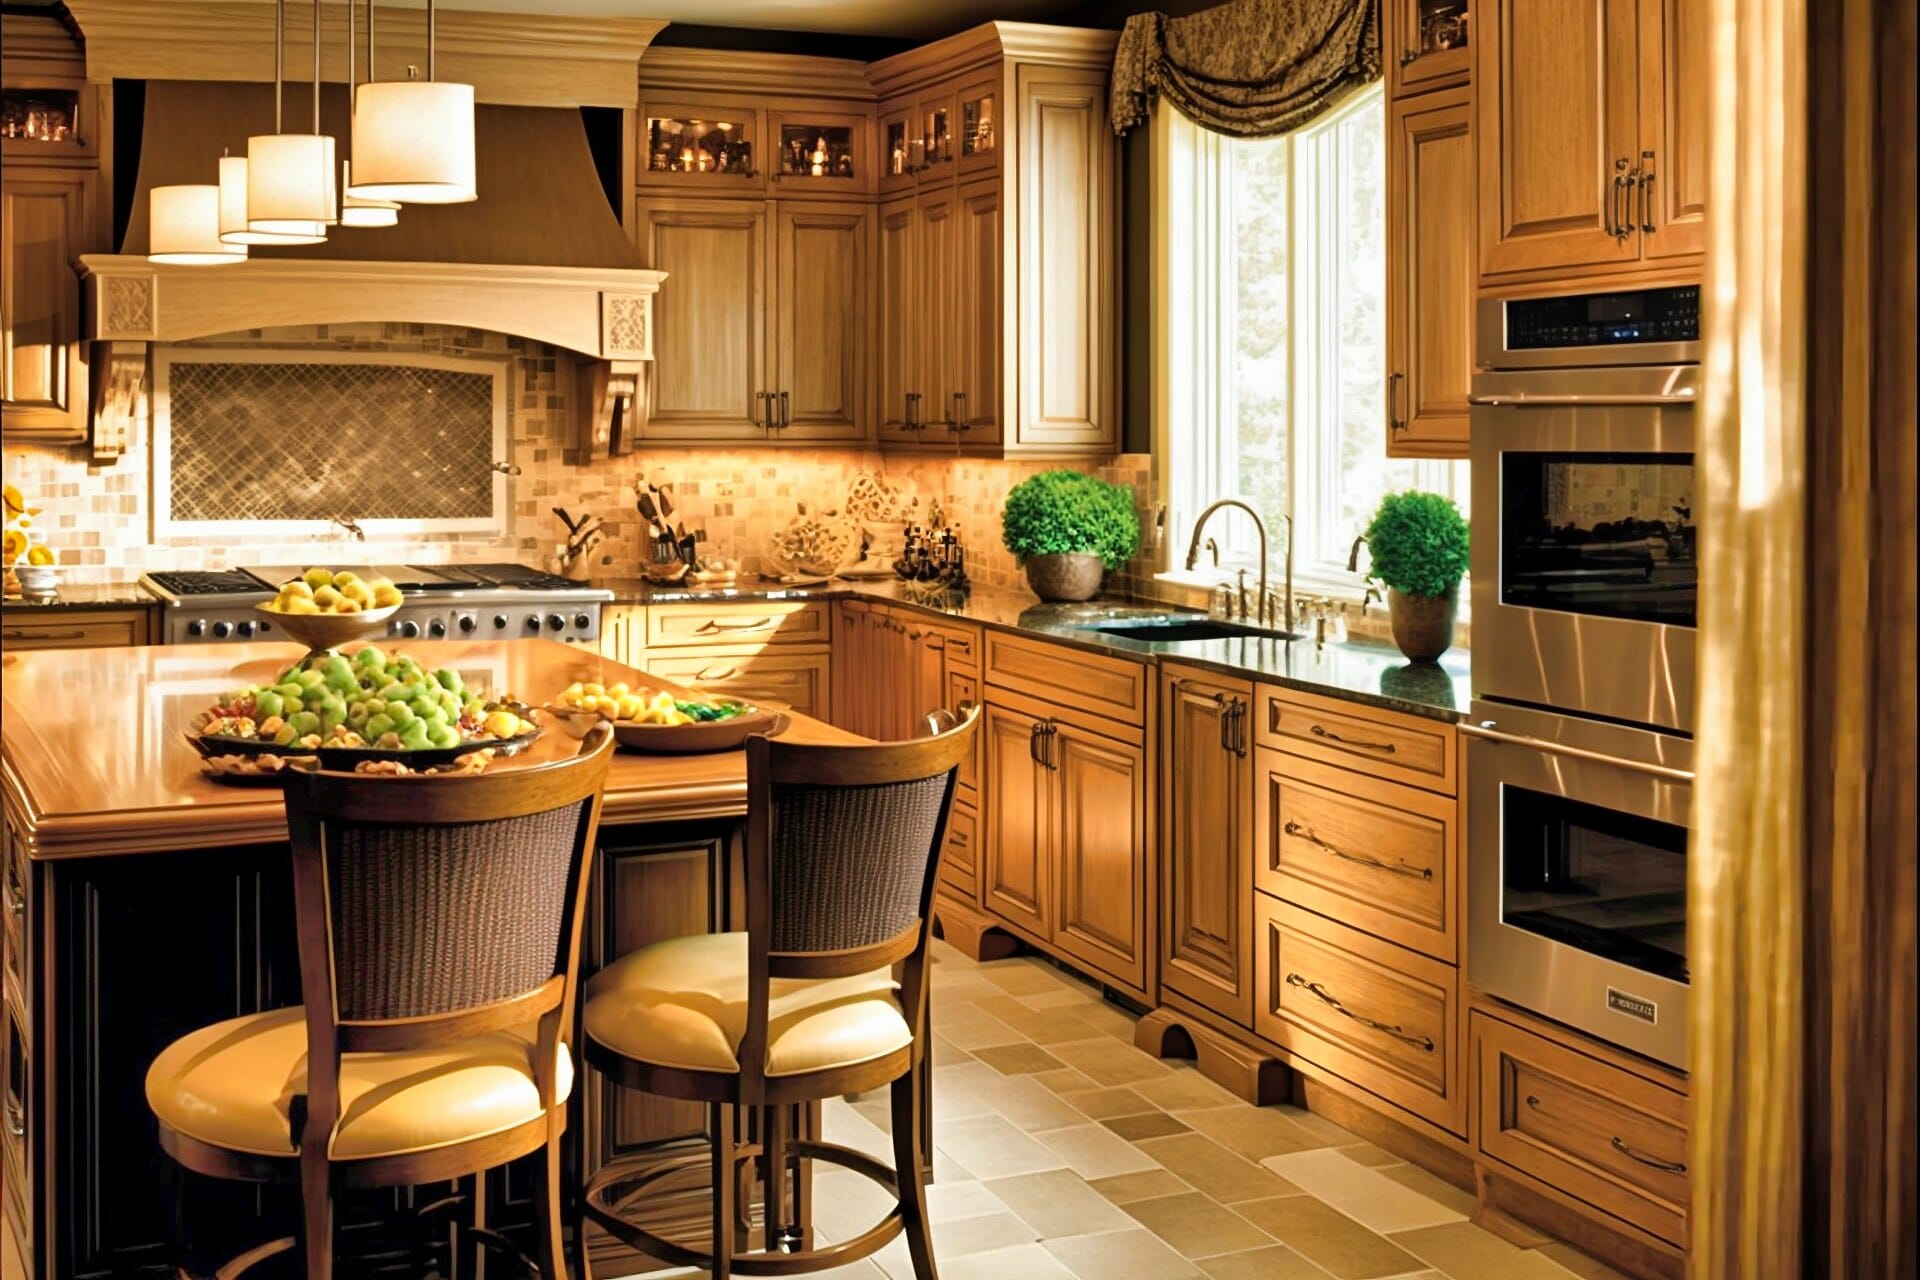 A Timeless, Classic Kitchen With Light Oak Cabinetry, A Ceramic Tile Backsplash, And A Large Wood-Topped Island.